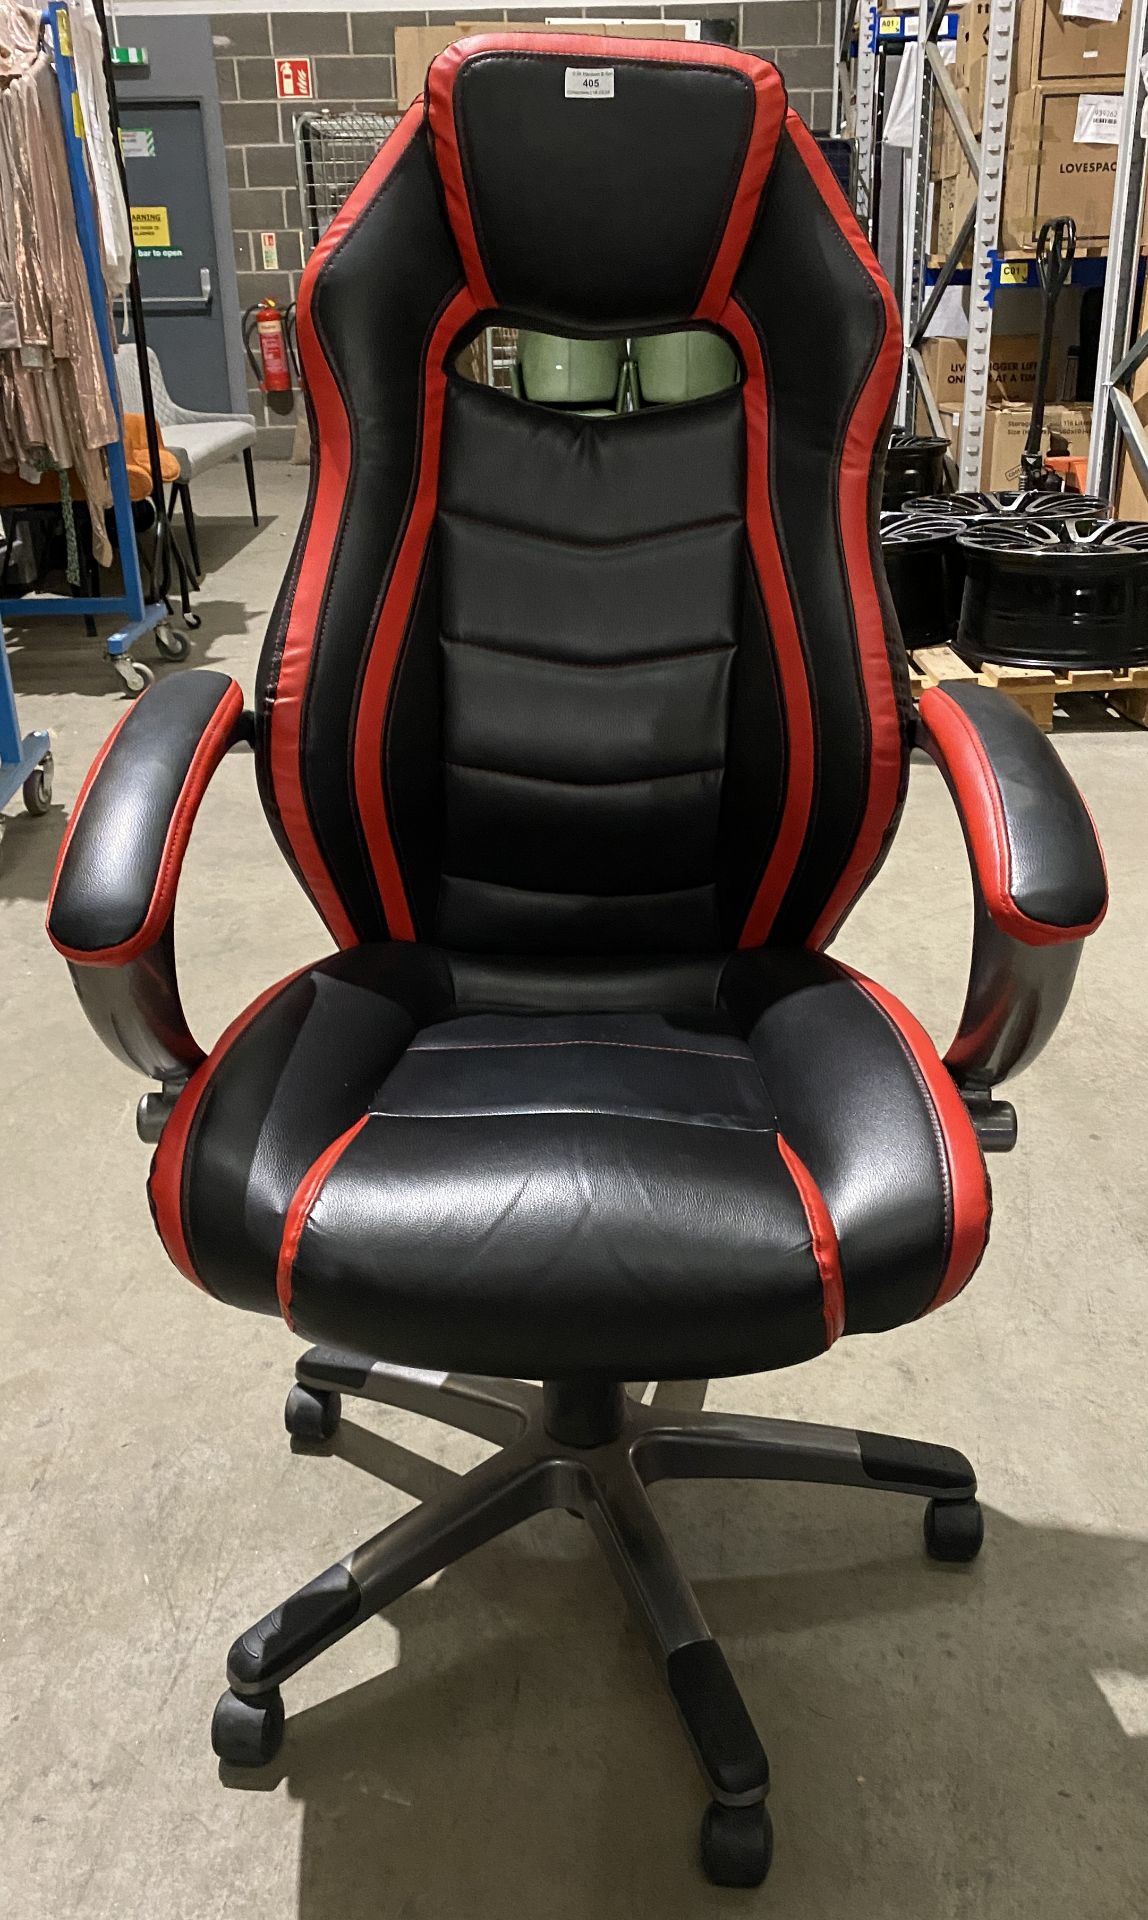 Black and red leather upholstered swivel armchair/gaming chair (Saleroom location: Aisle 1)